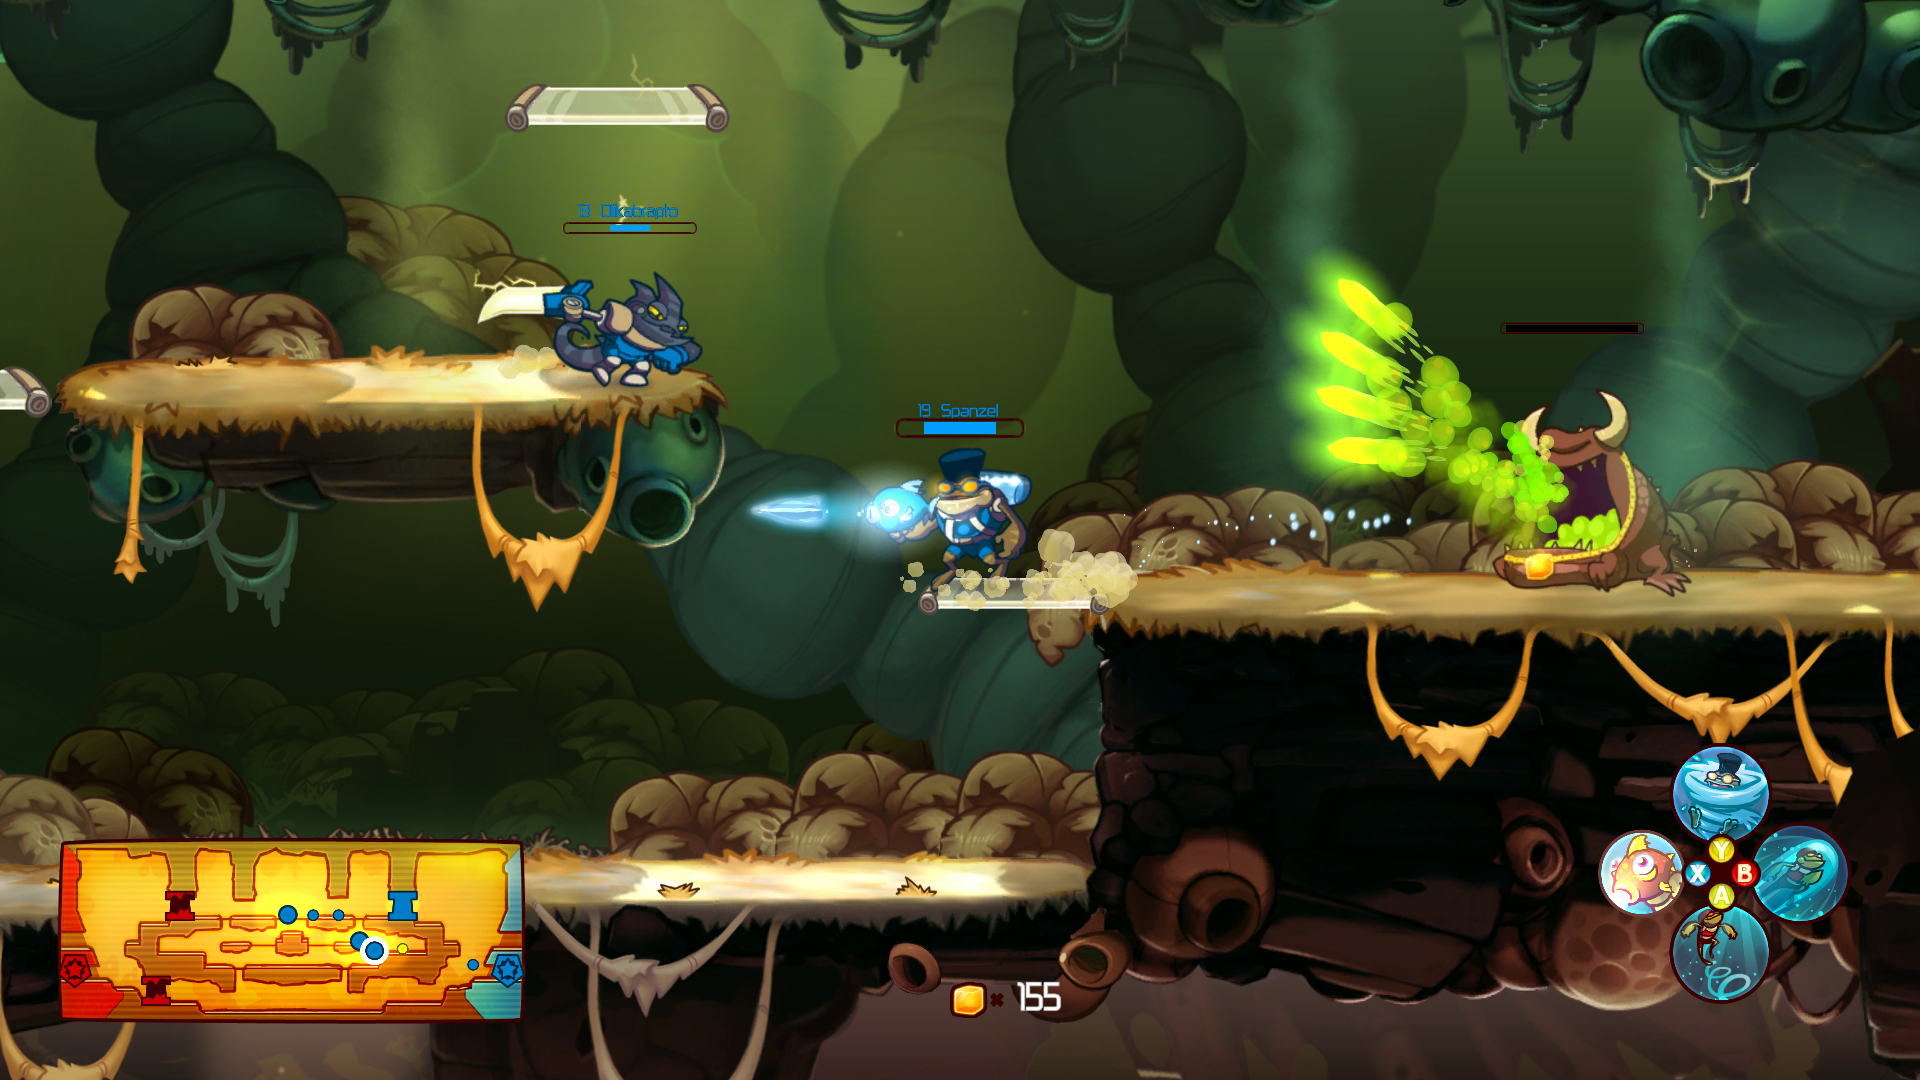 2D Platformer 'Awesomenauts' Announced for XBLA, PSN | MonsterVine